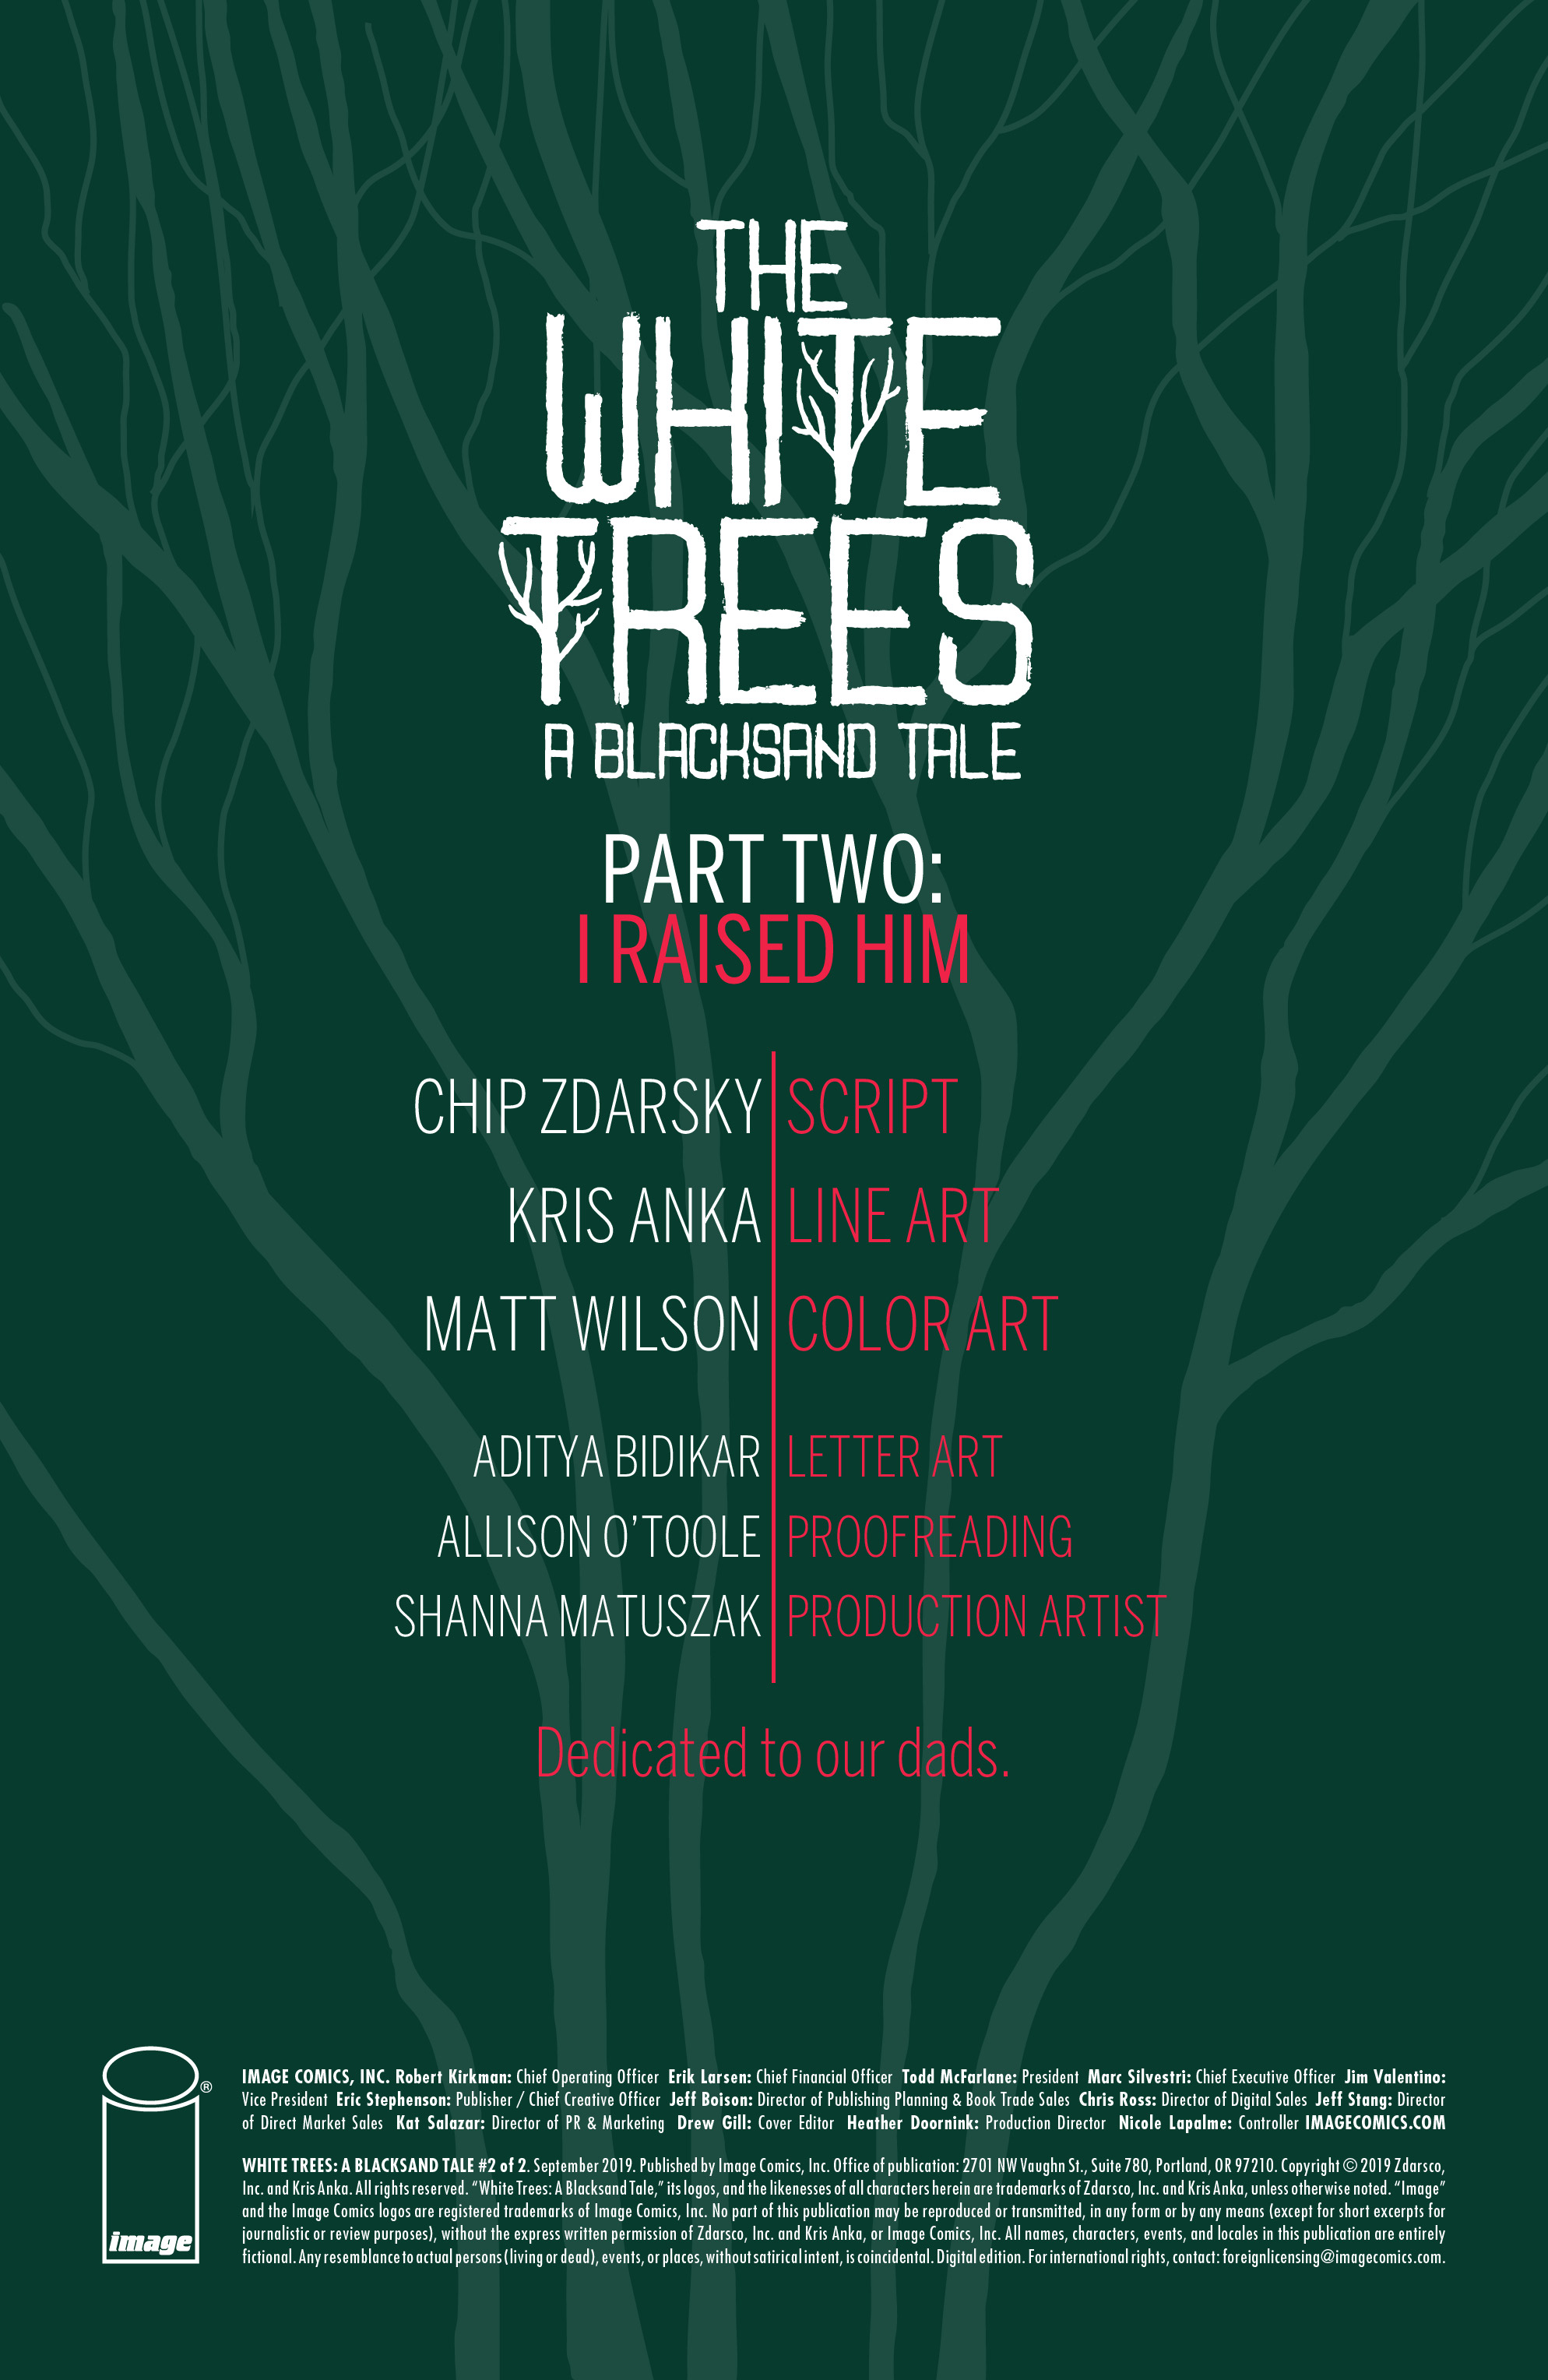 Read online The White Trees comic -  Issue #2 - 3